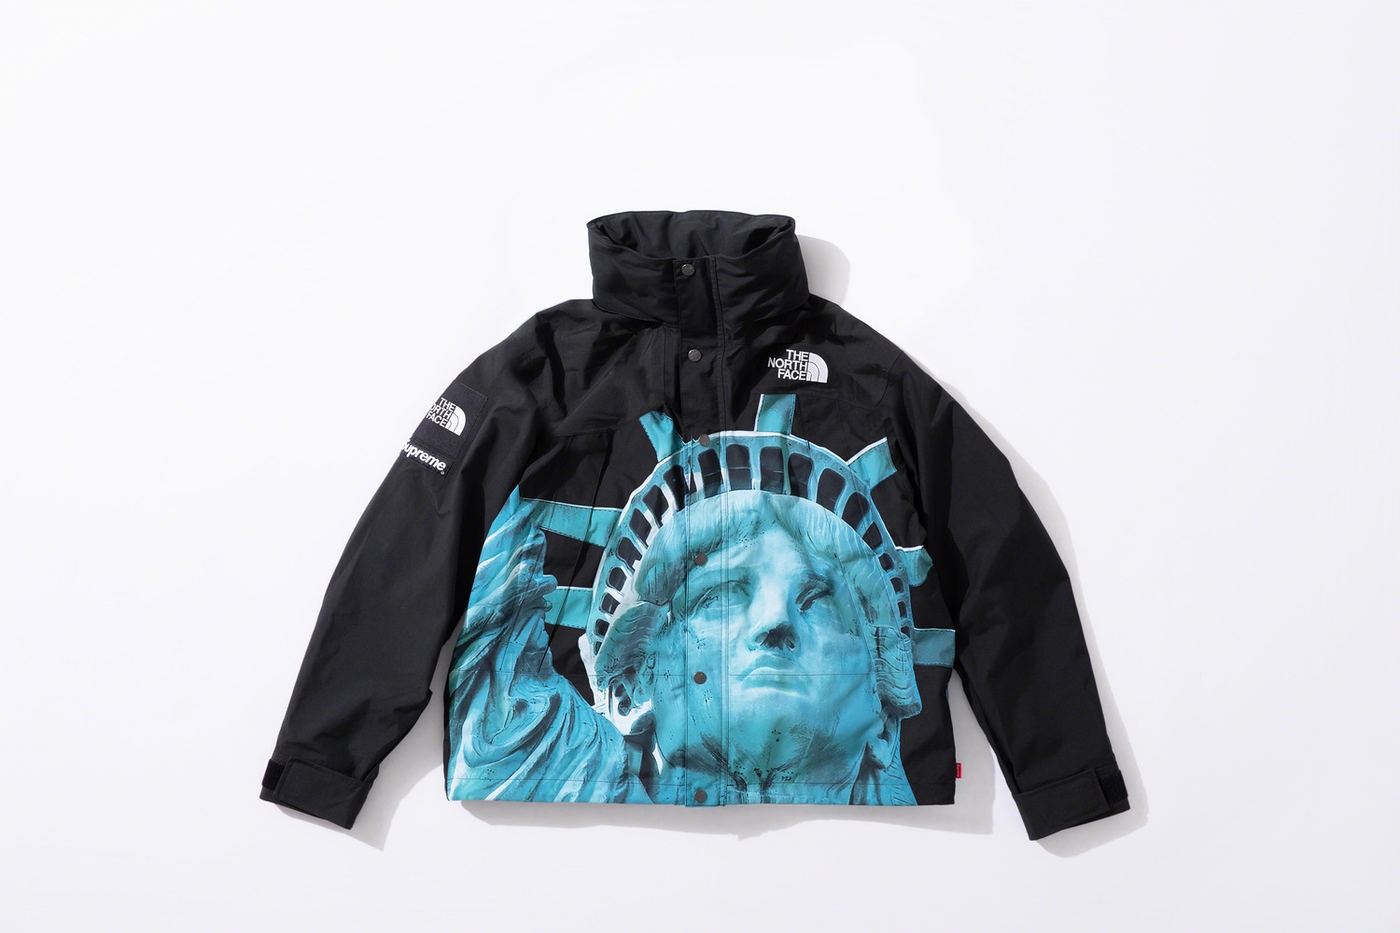 Statue of Liberty Mountain Jacket with packable hood. (21/29)